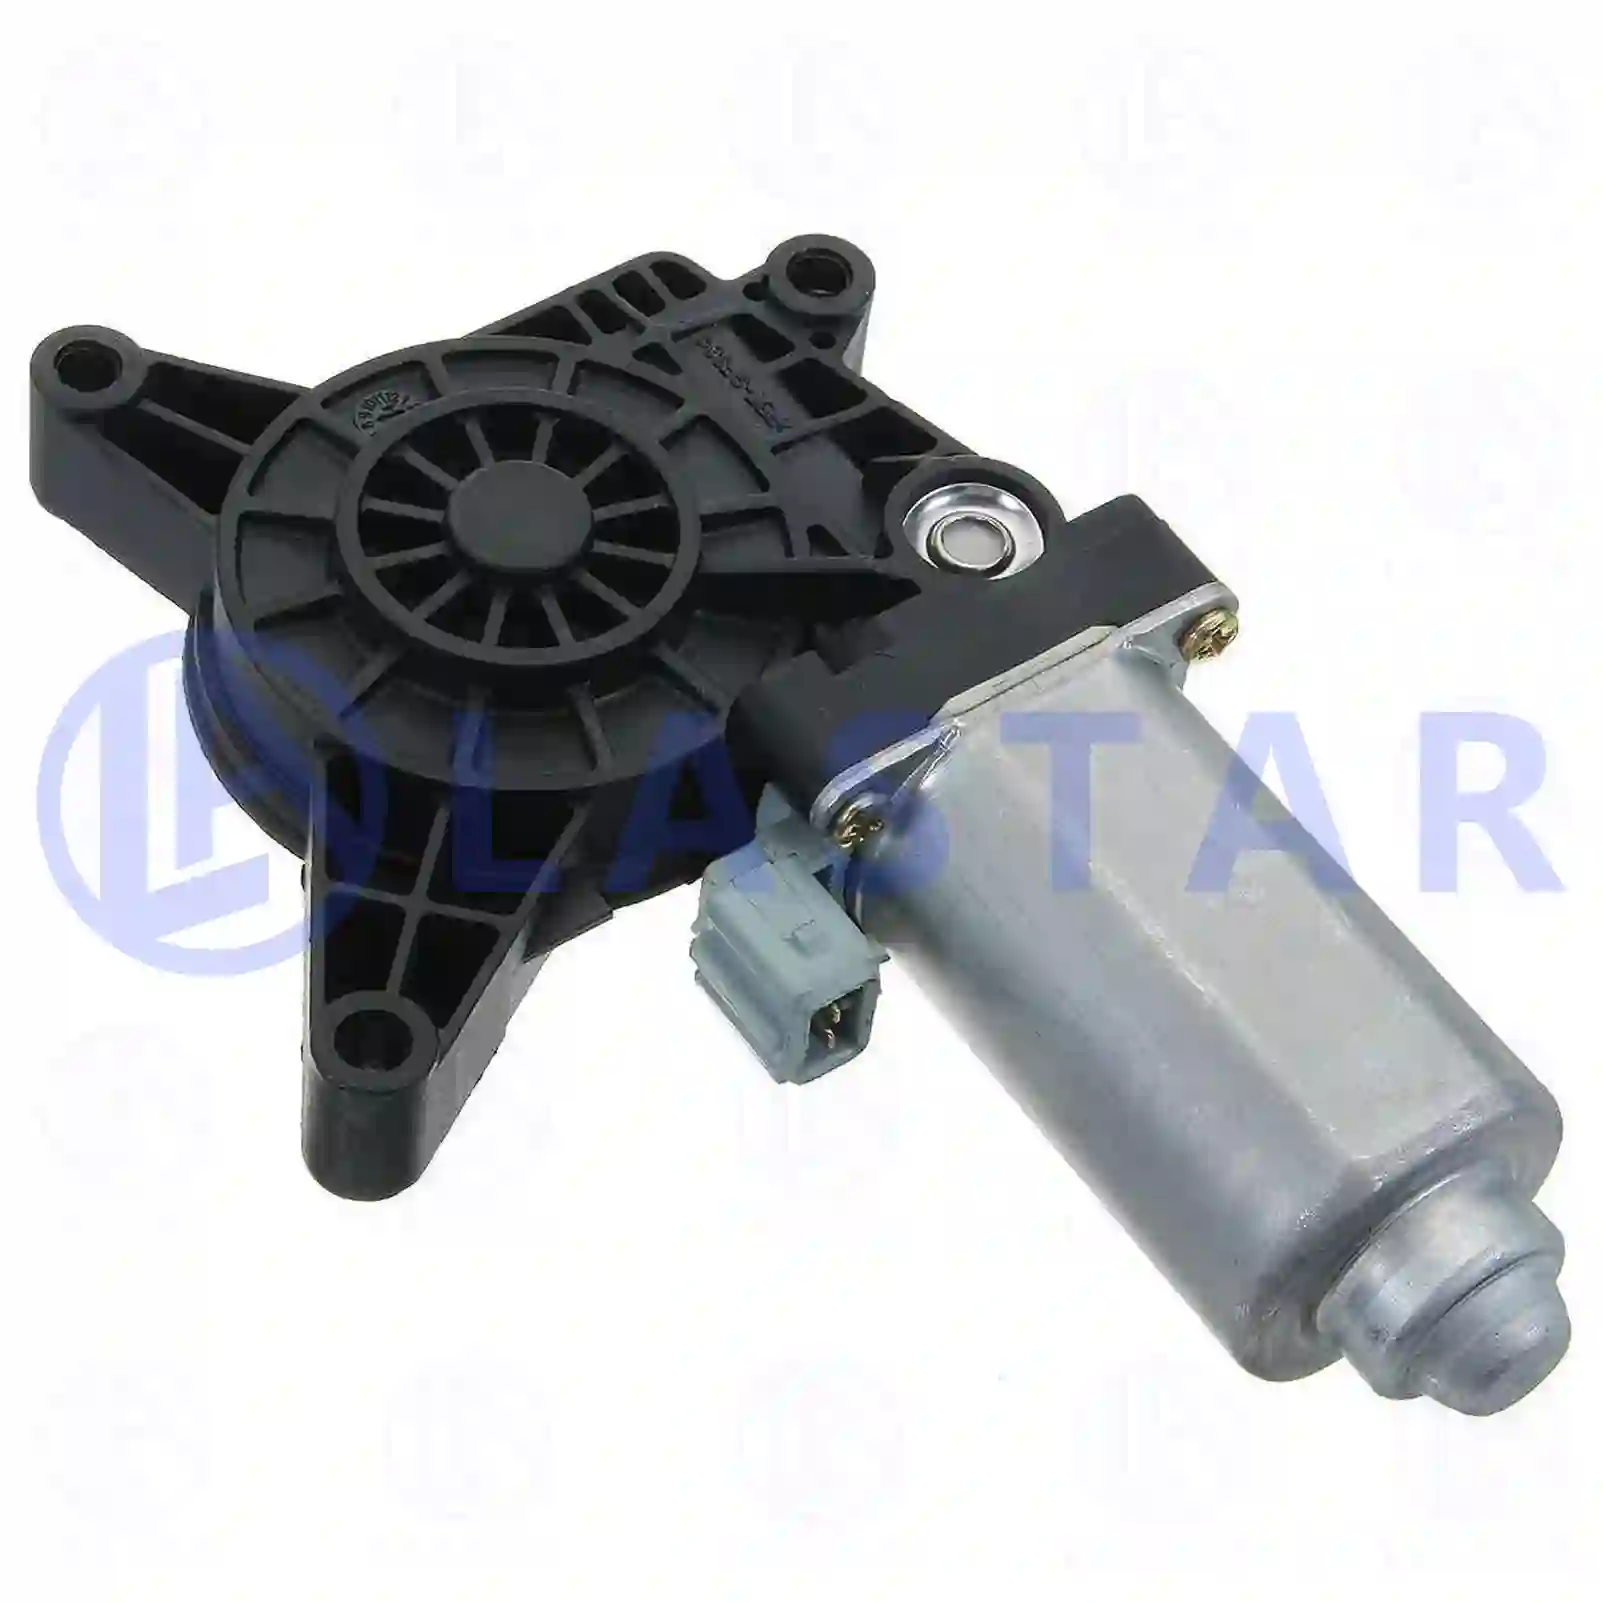 Window lifter motor, right, 77718921, 0008202908, 0008205008, ZG61281-0008 ||  77718921 Lastar Spare Part | Truck Spare Parts, Auotomotive Spare Parts Window lifter motor, right, 77718921, 0008202908, 0008205008, ZG61281-0008 ||  77718921 Lastar Spare Part | Truck Spare Parts, Auotomotive Spare Parts